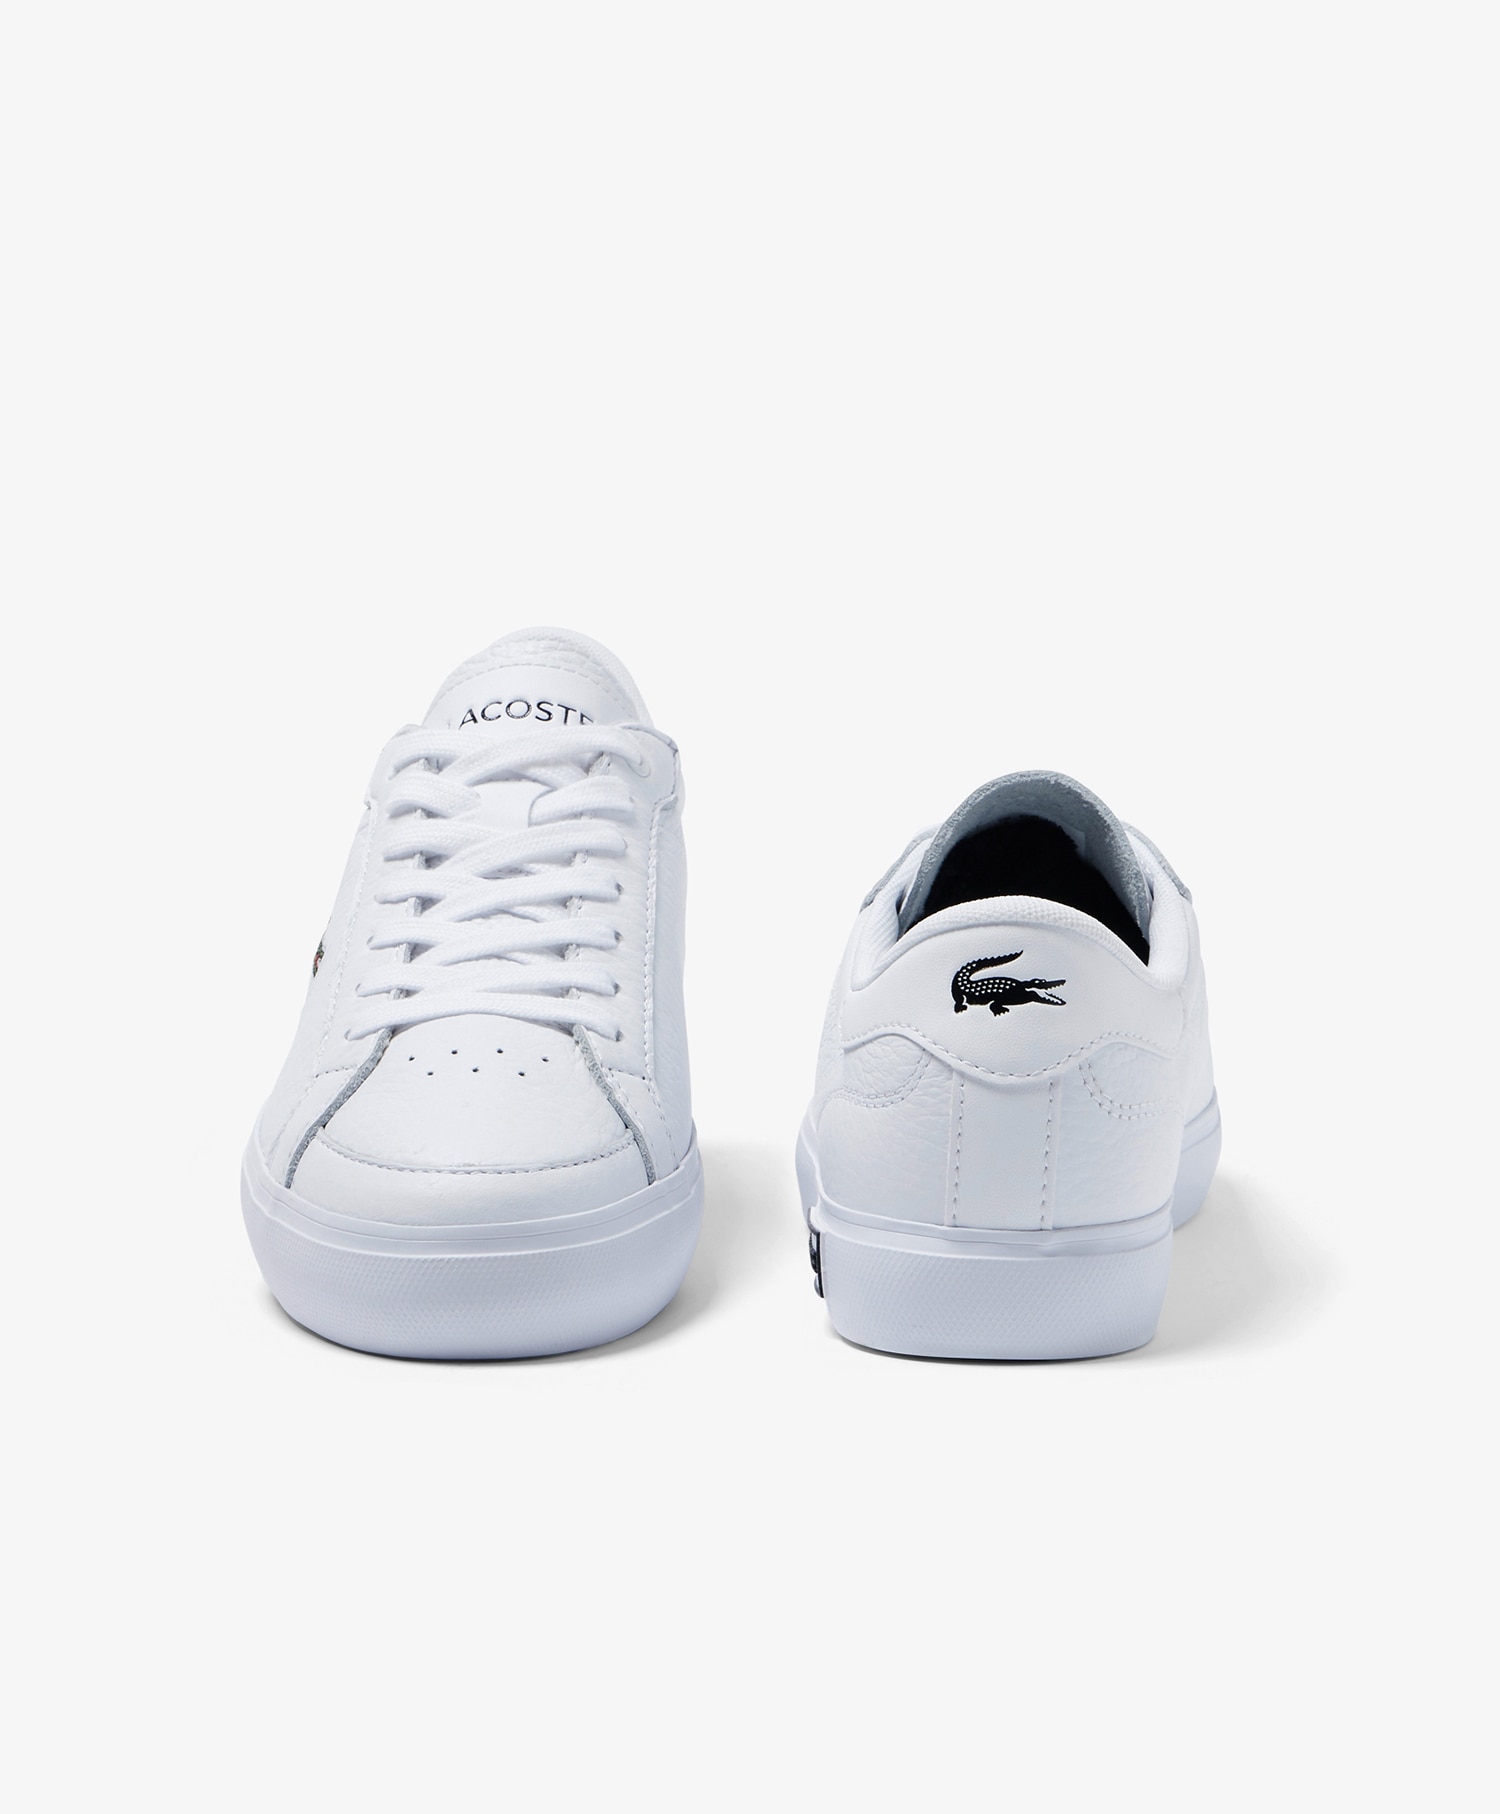 Lacoste Powercourt Womens Leather